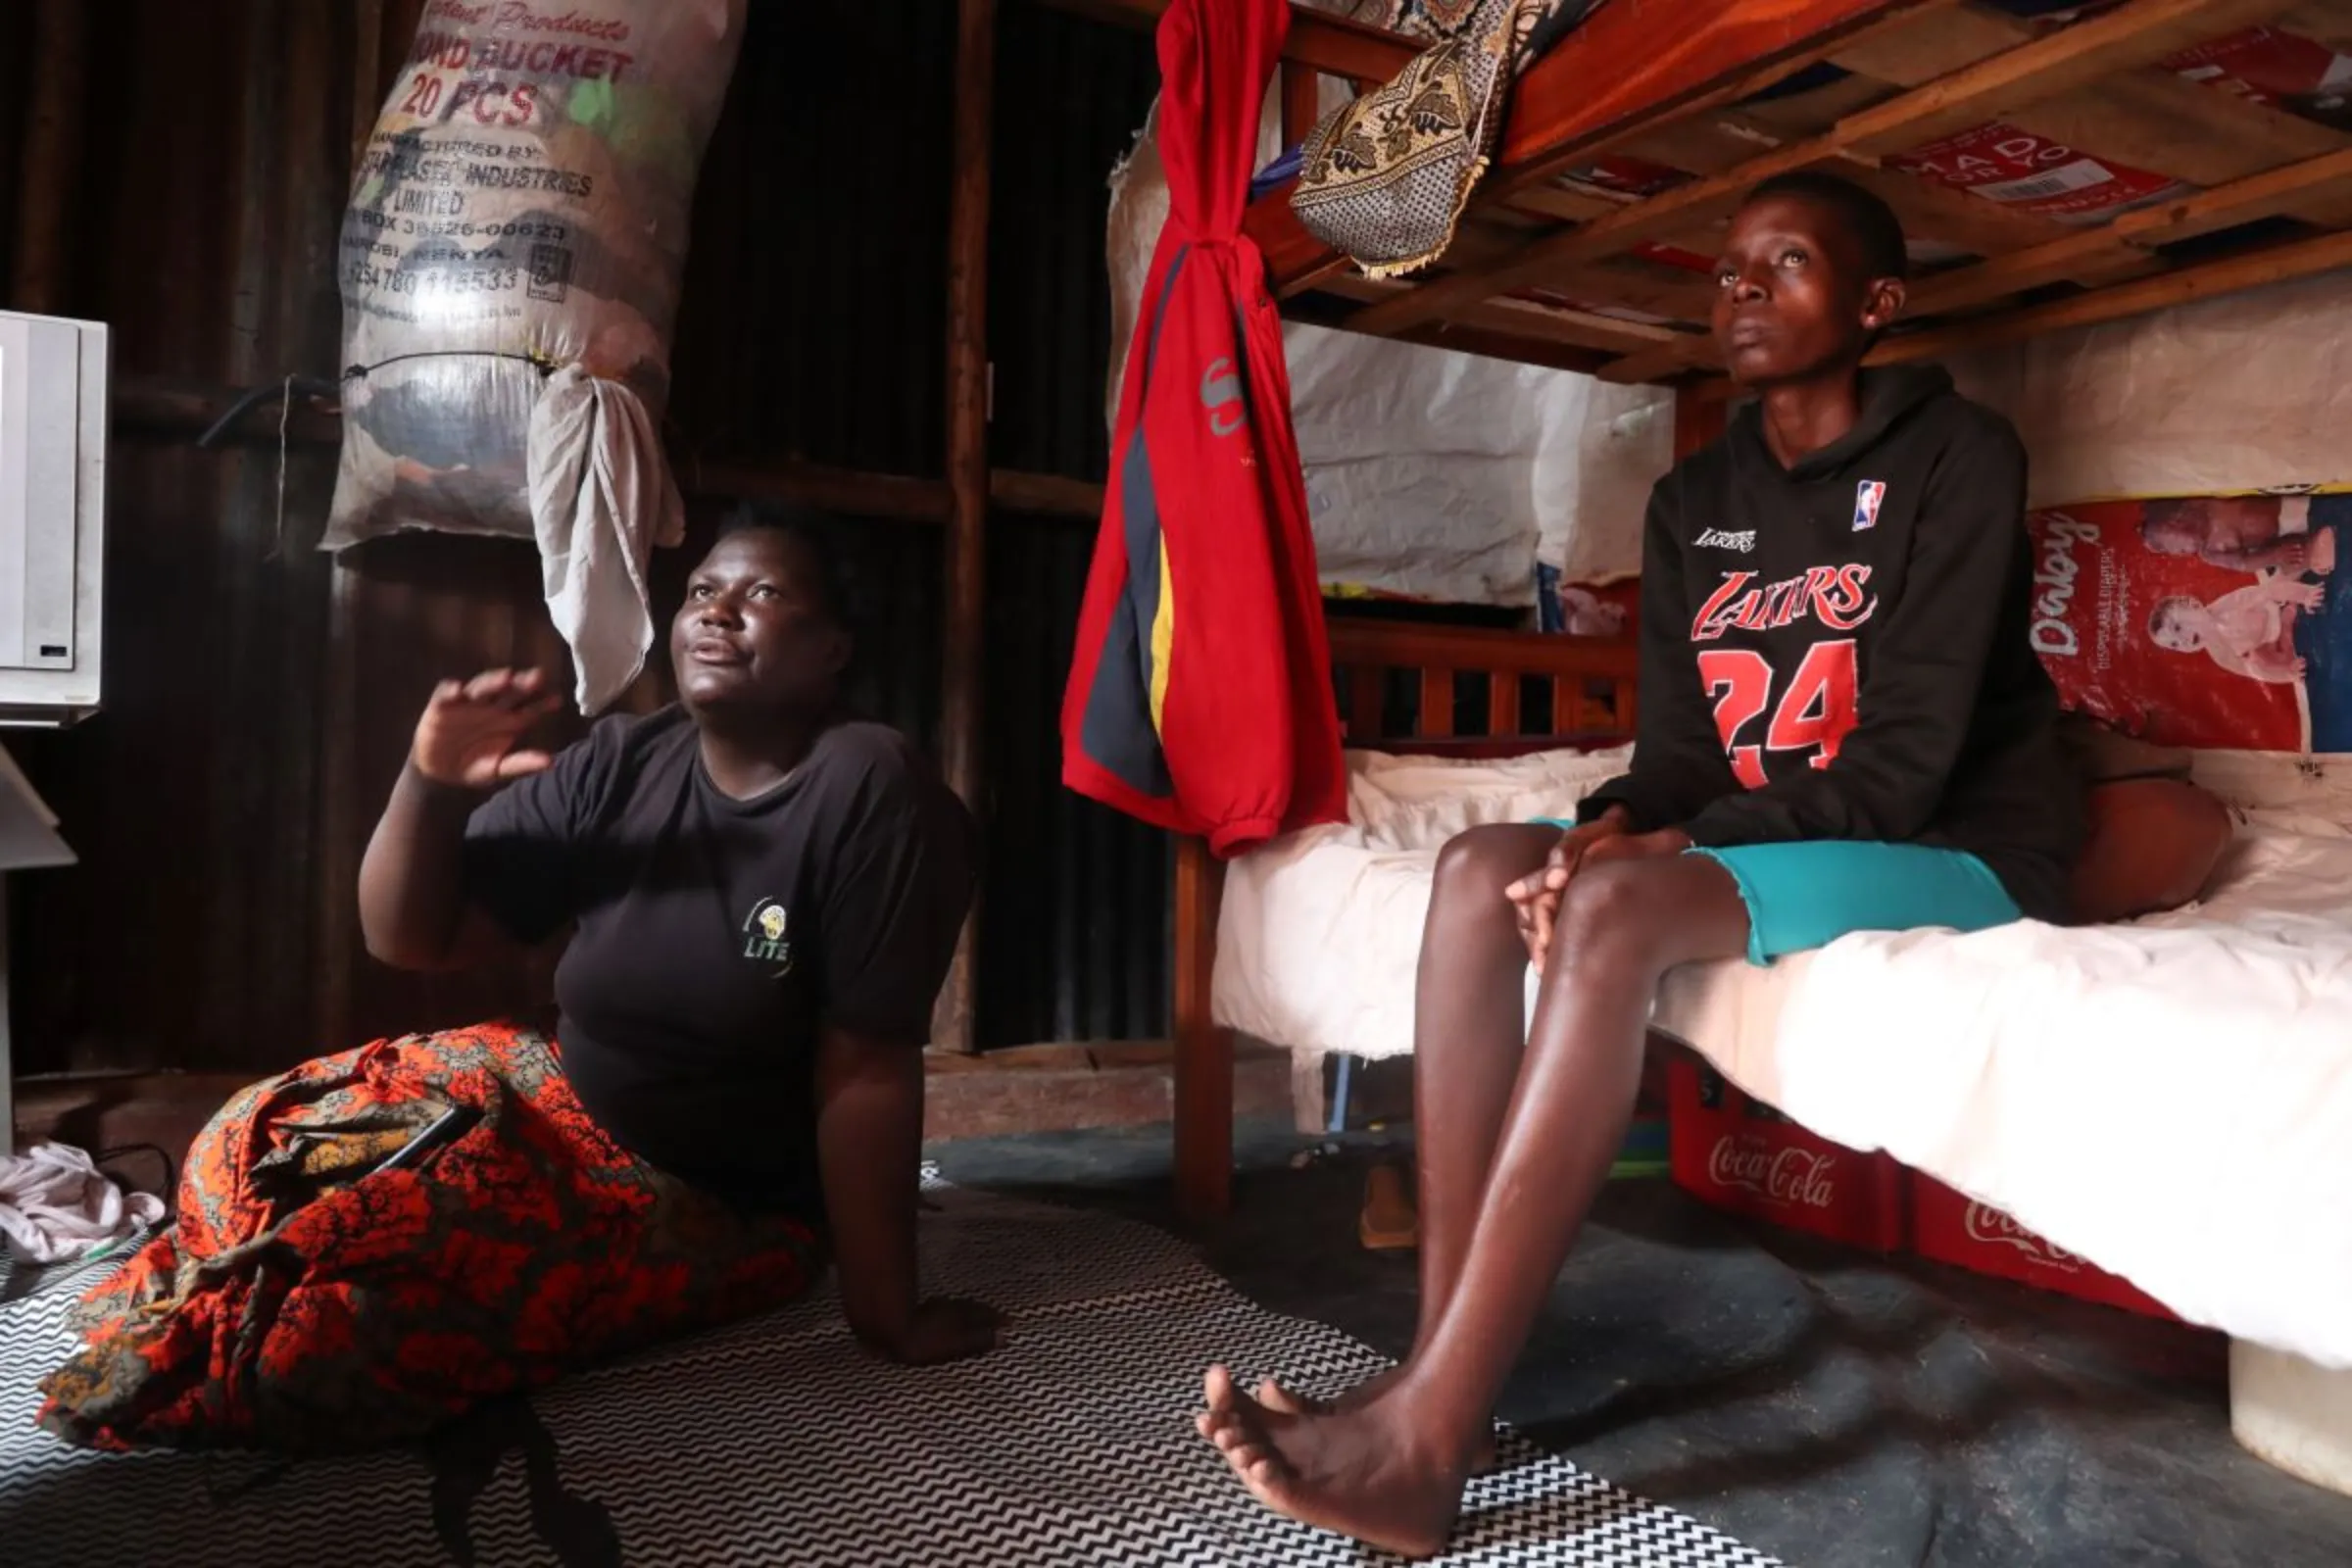 Sheilah Musimbi (R), 16, with her guardian Mercy Indiazi (L) at their home in Kawangware, Nairobi on April 14, 2023